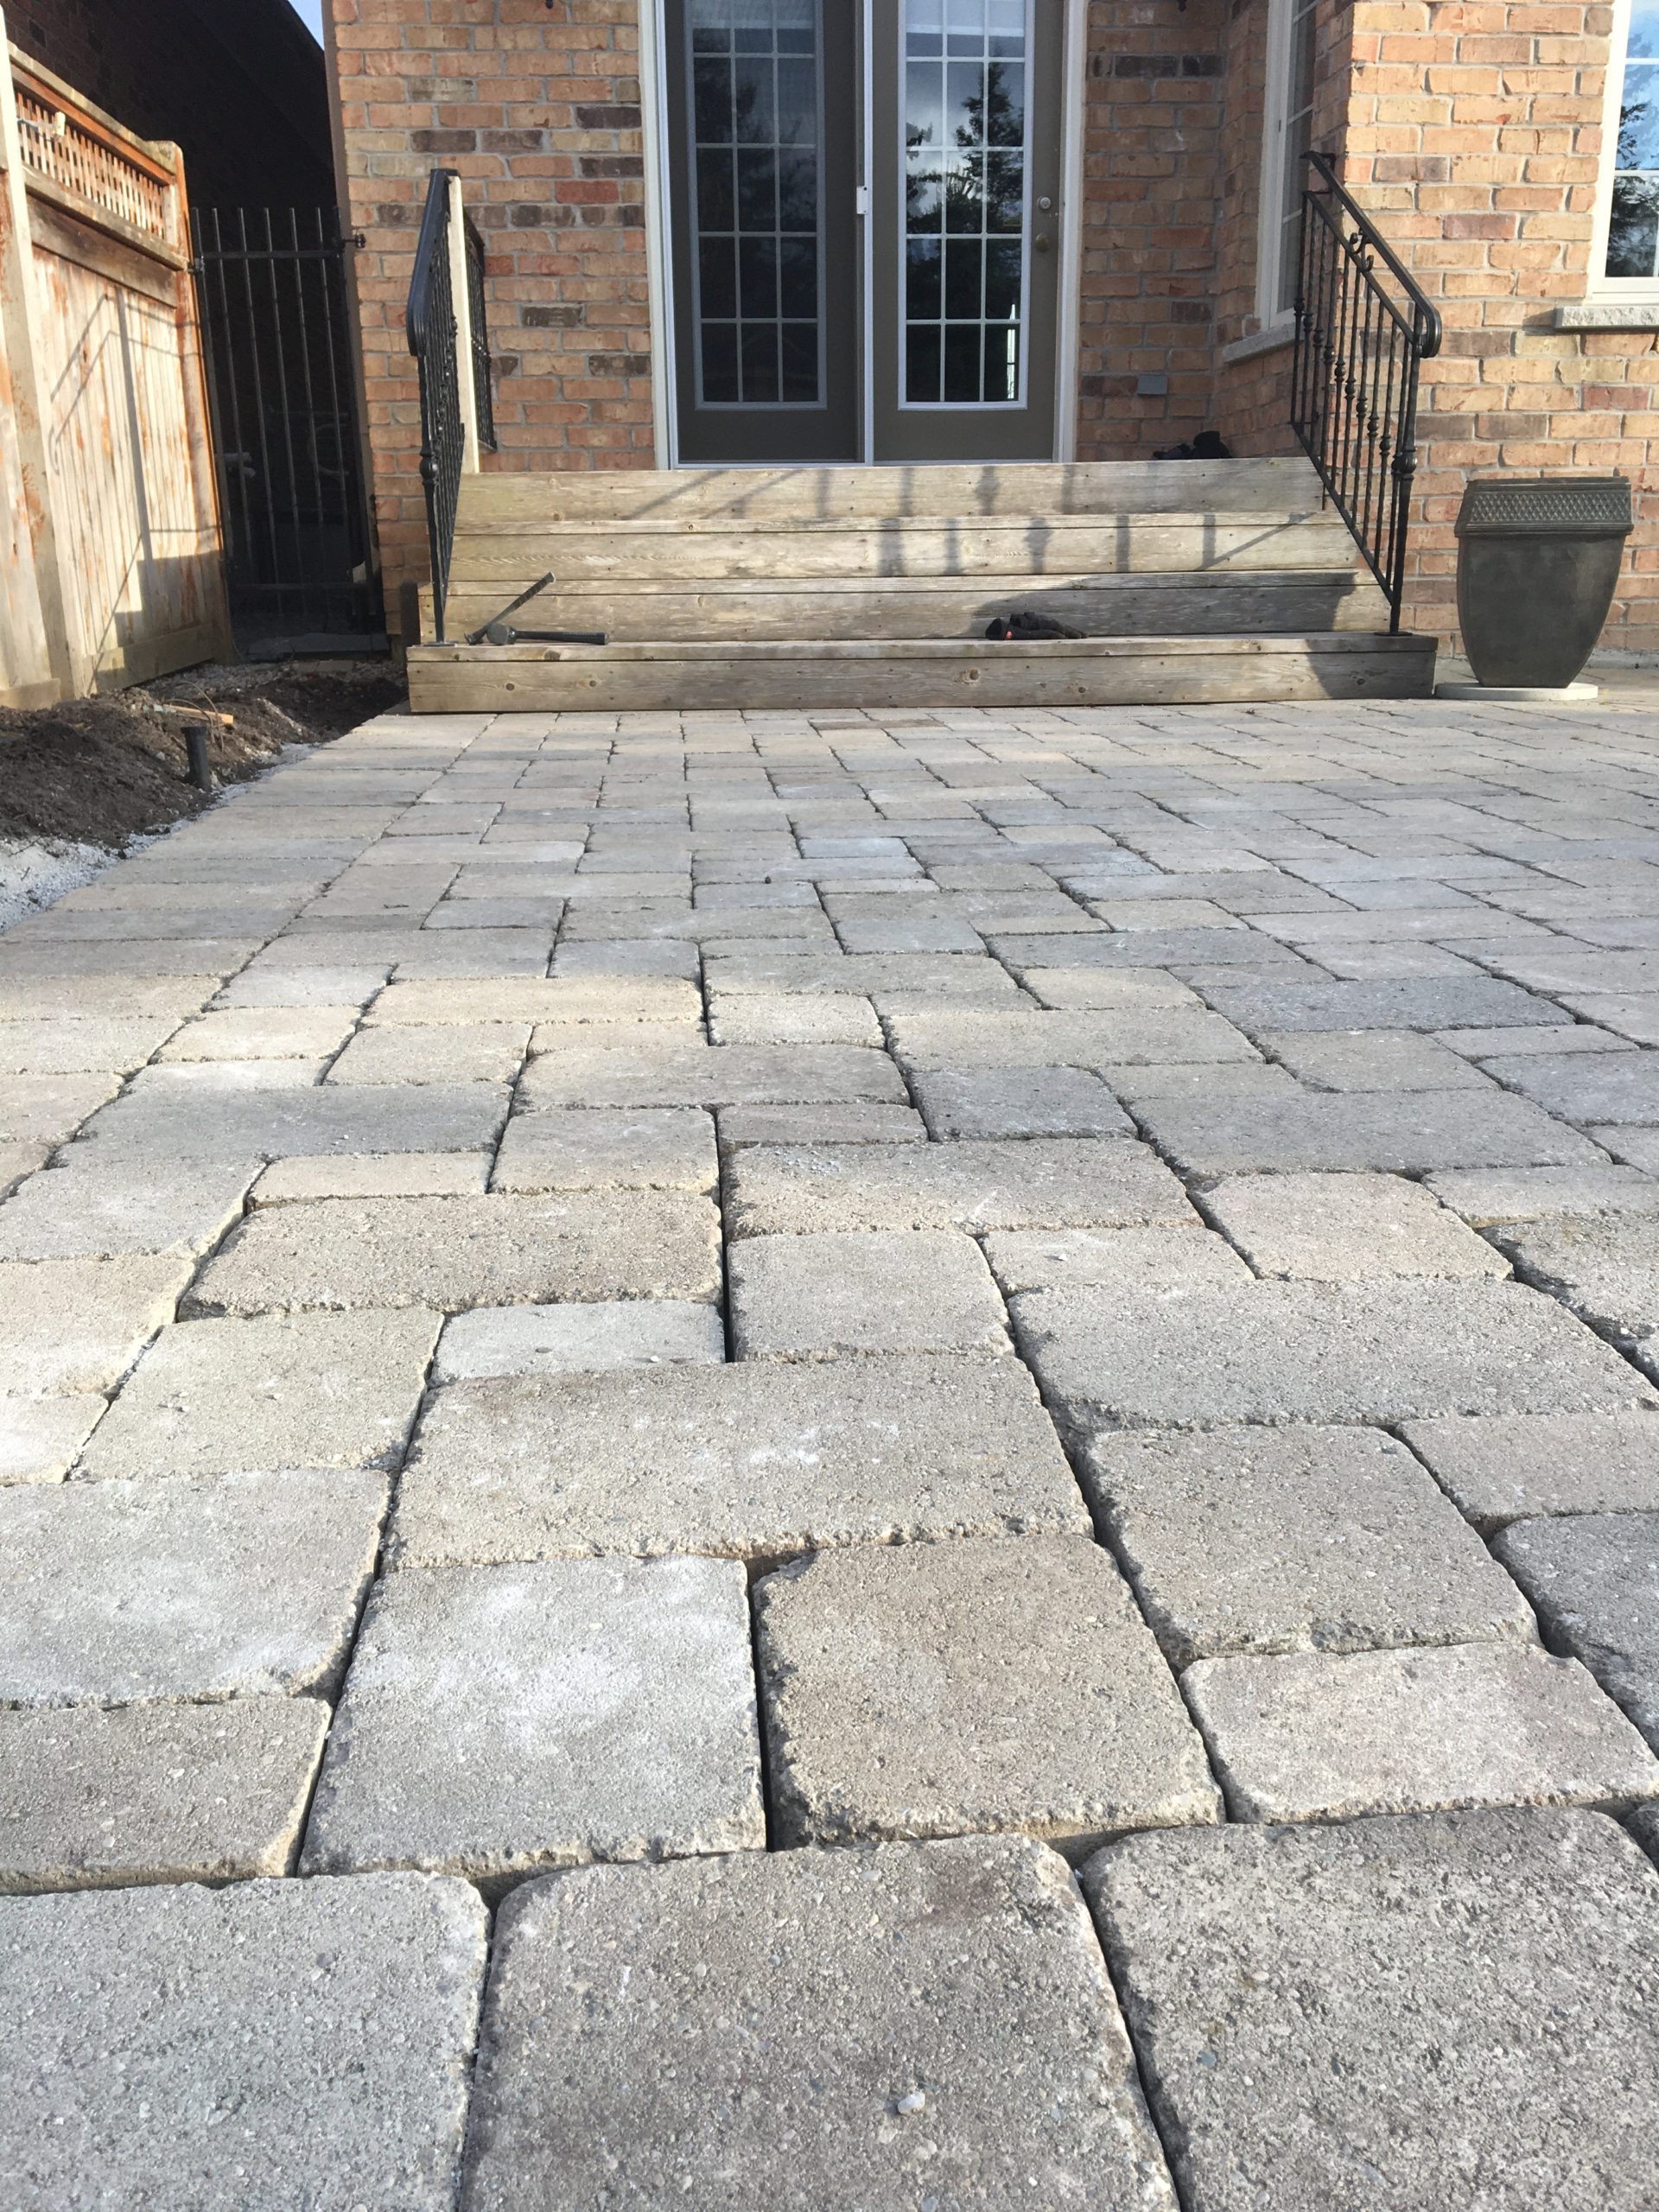 Repaired Paver Patio after being leveled